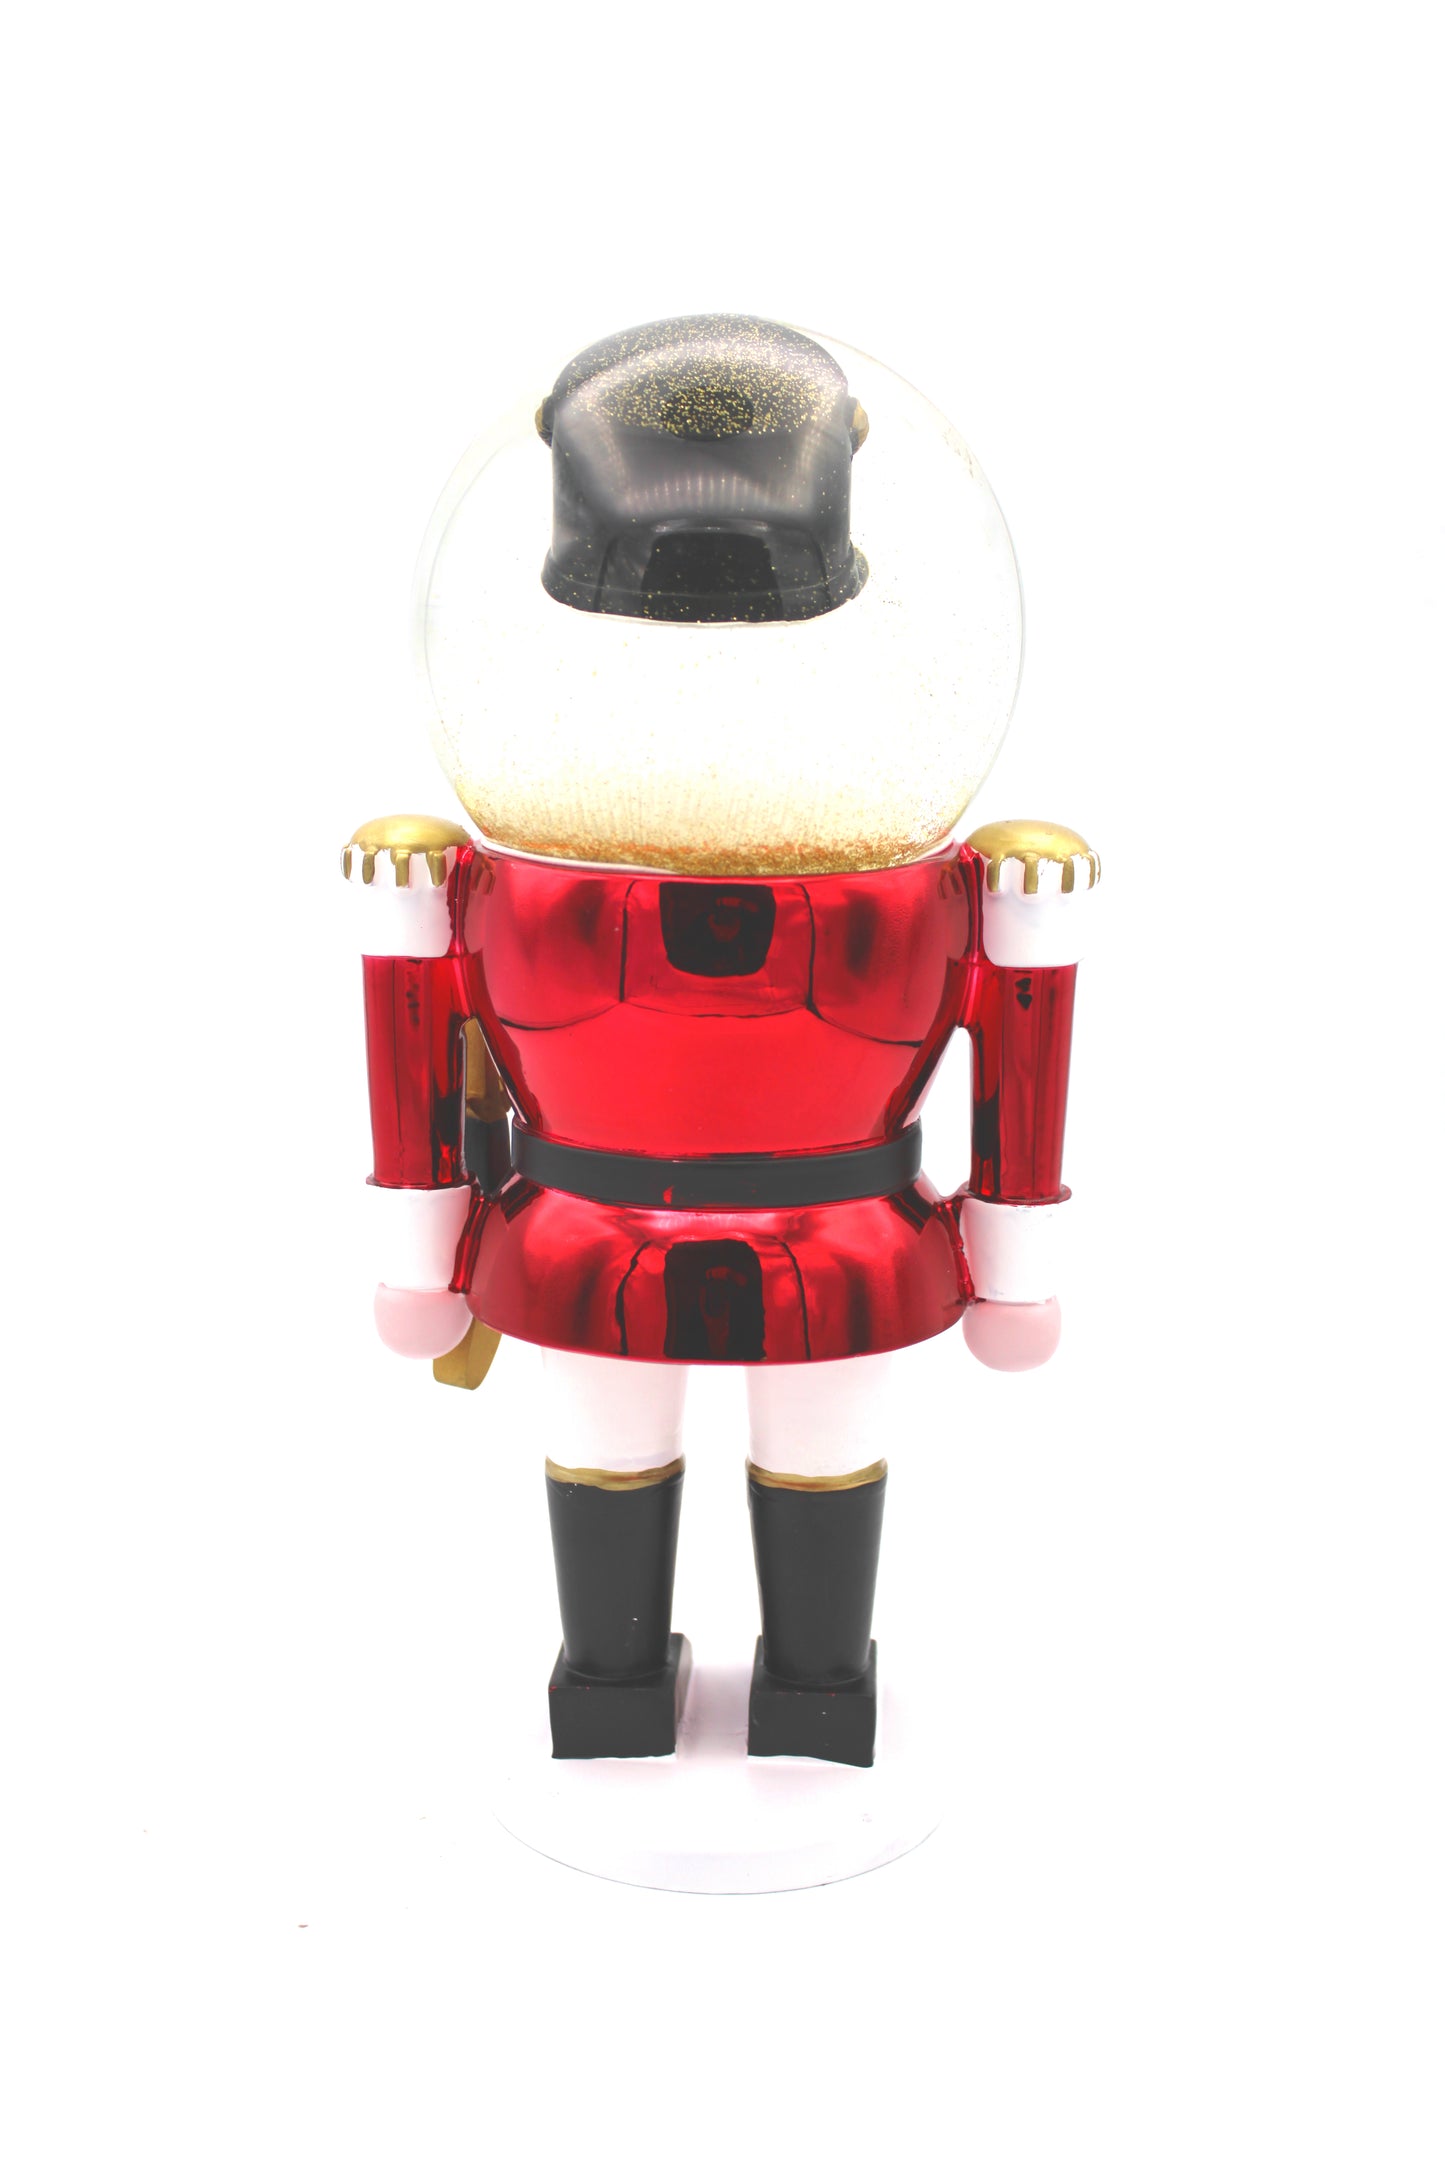 Back View of The Red Nutcracker Snowglobe